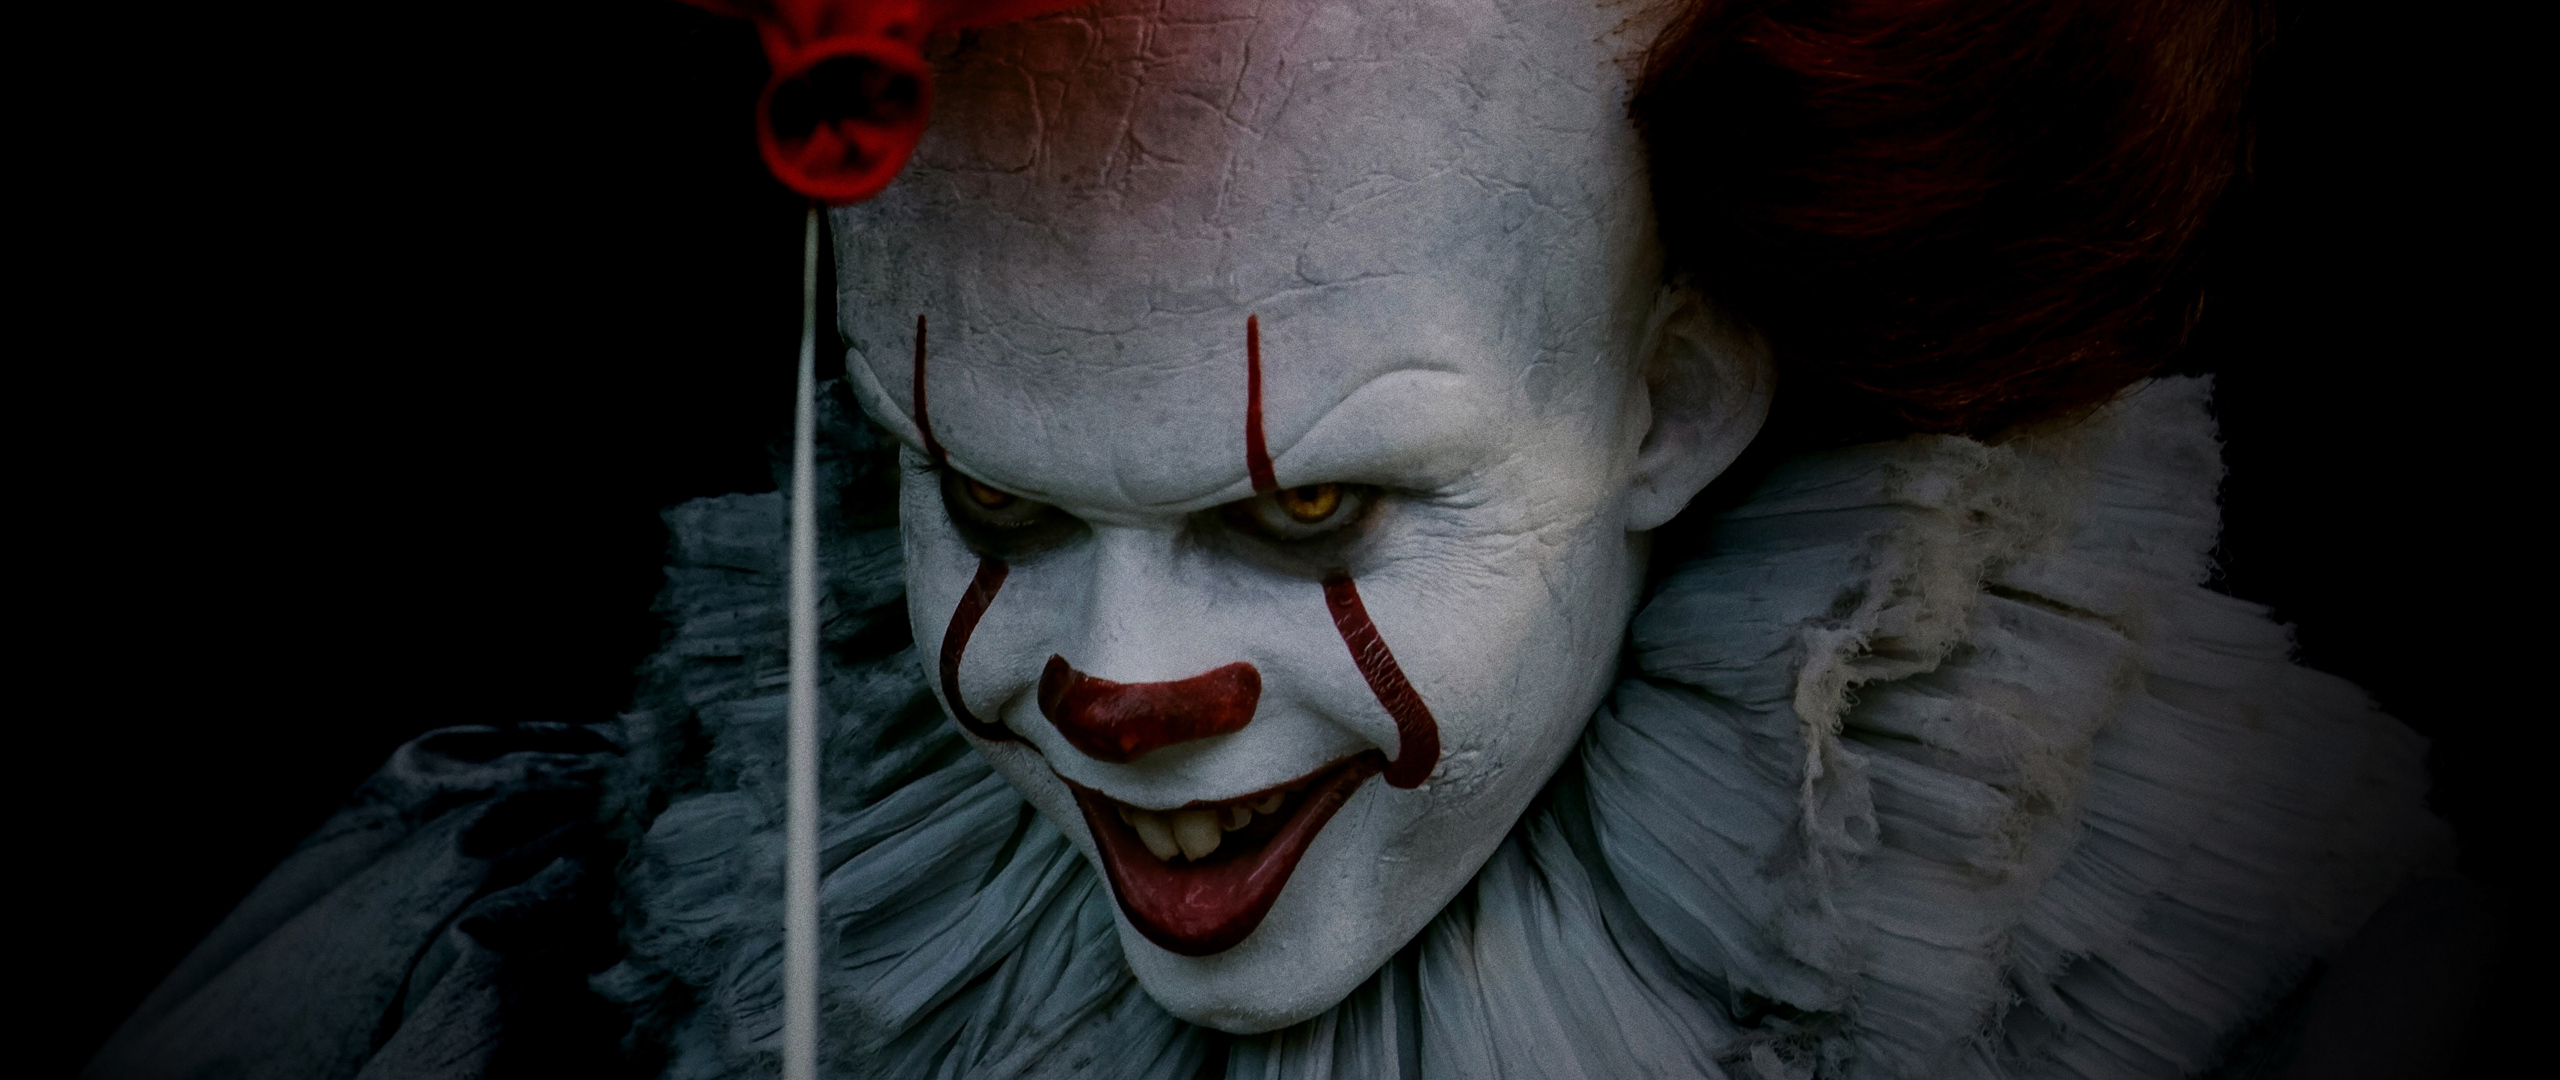 It Pennywise 8k In 2560x1080 Resolution. it-pennywise-8k-f5.jpg. 